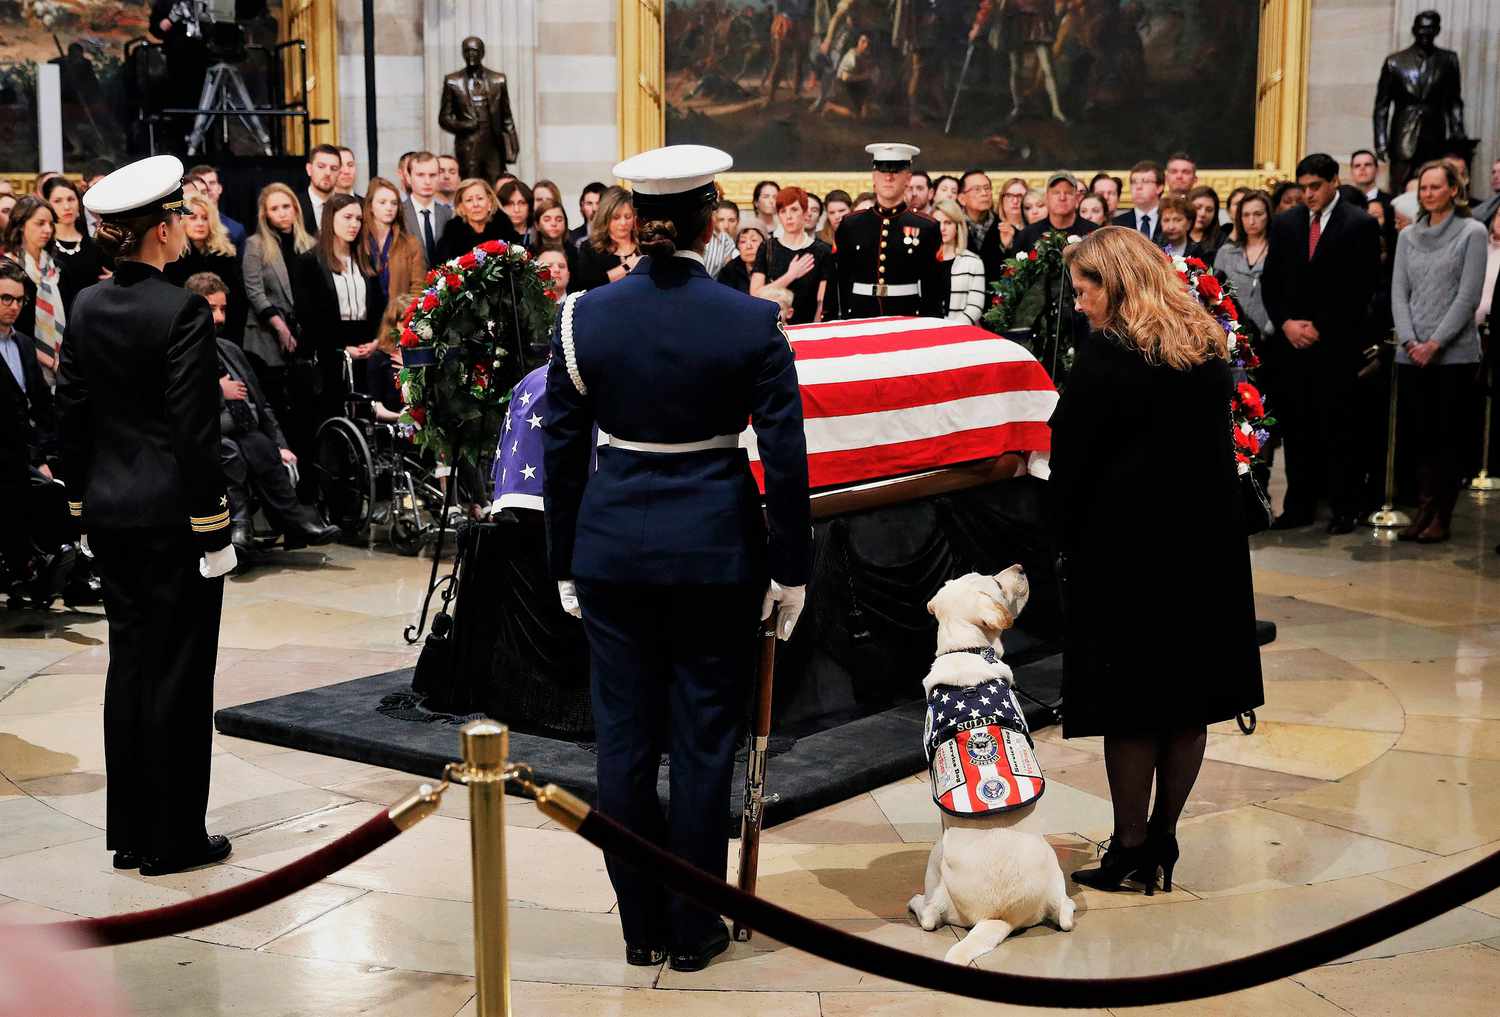 Sully the service dog sits next to George H. W. Bush's casket